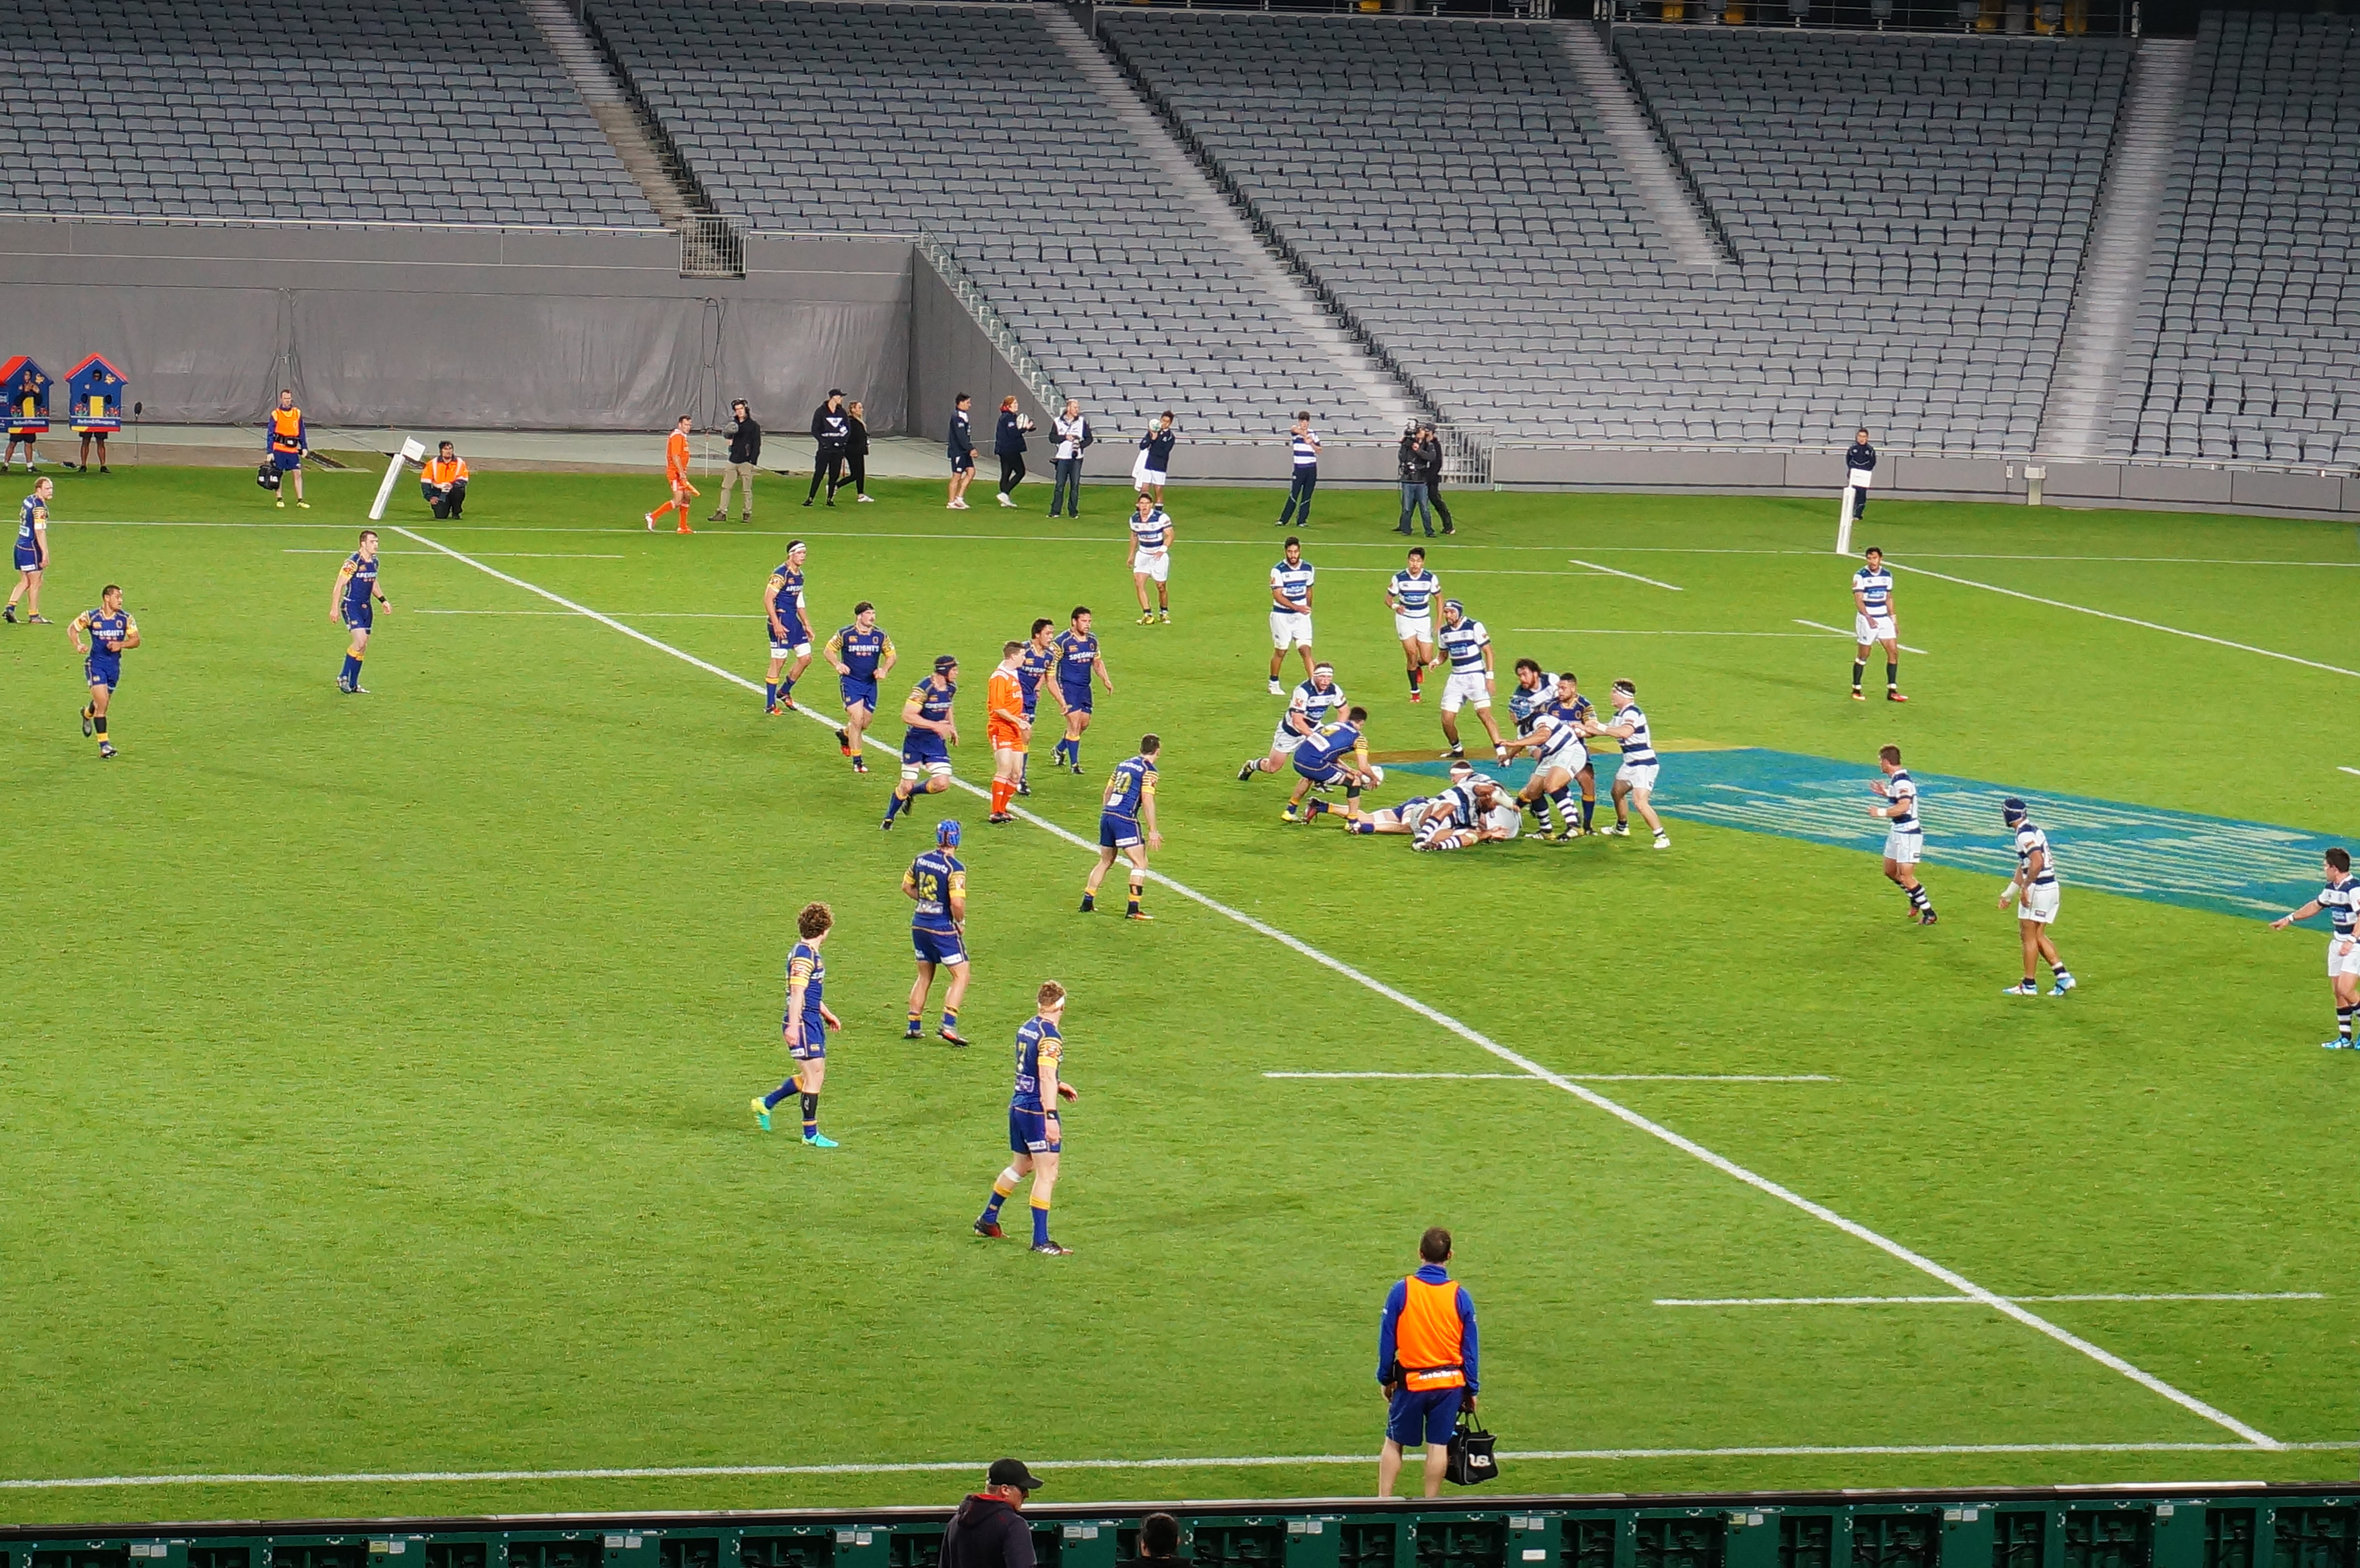 Rugby, the National Sport of New Zealand